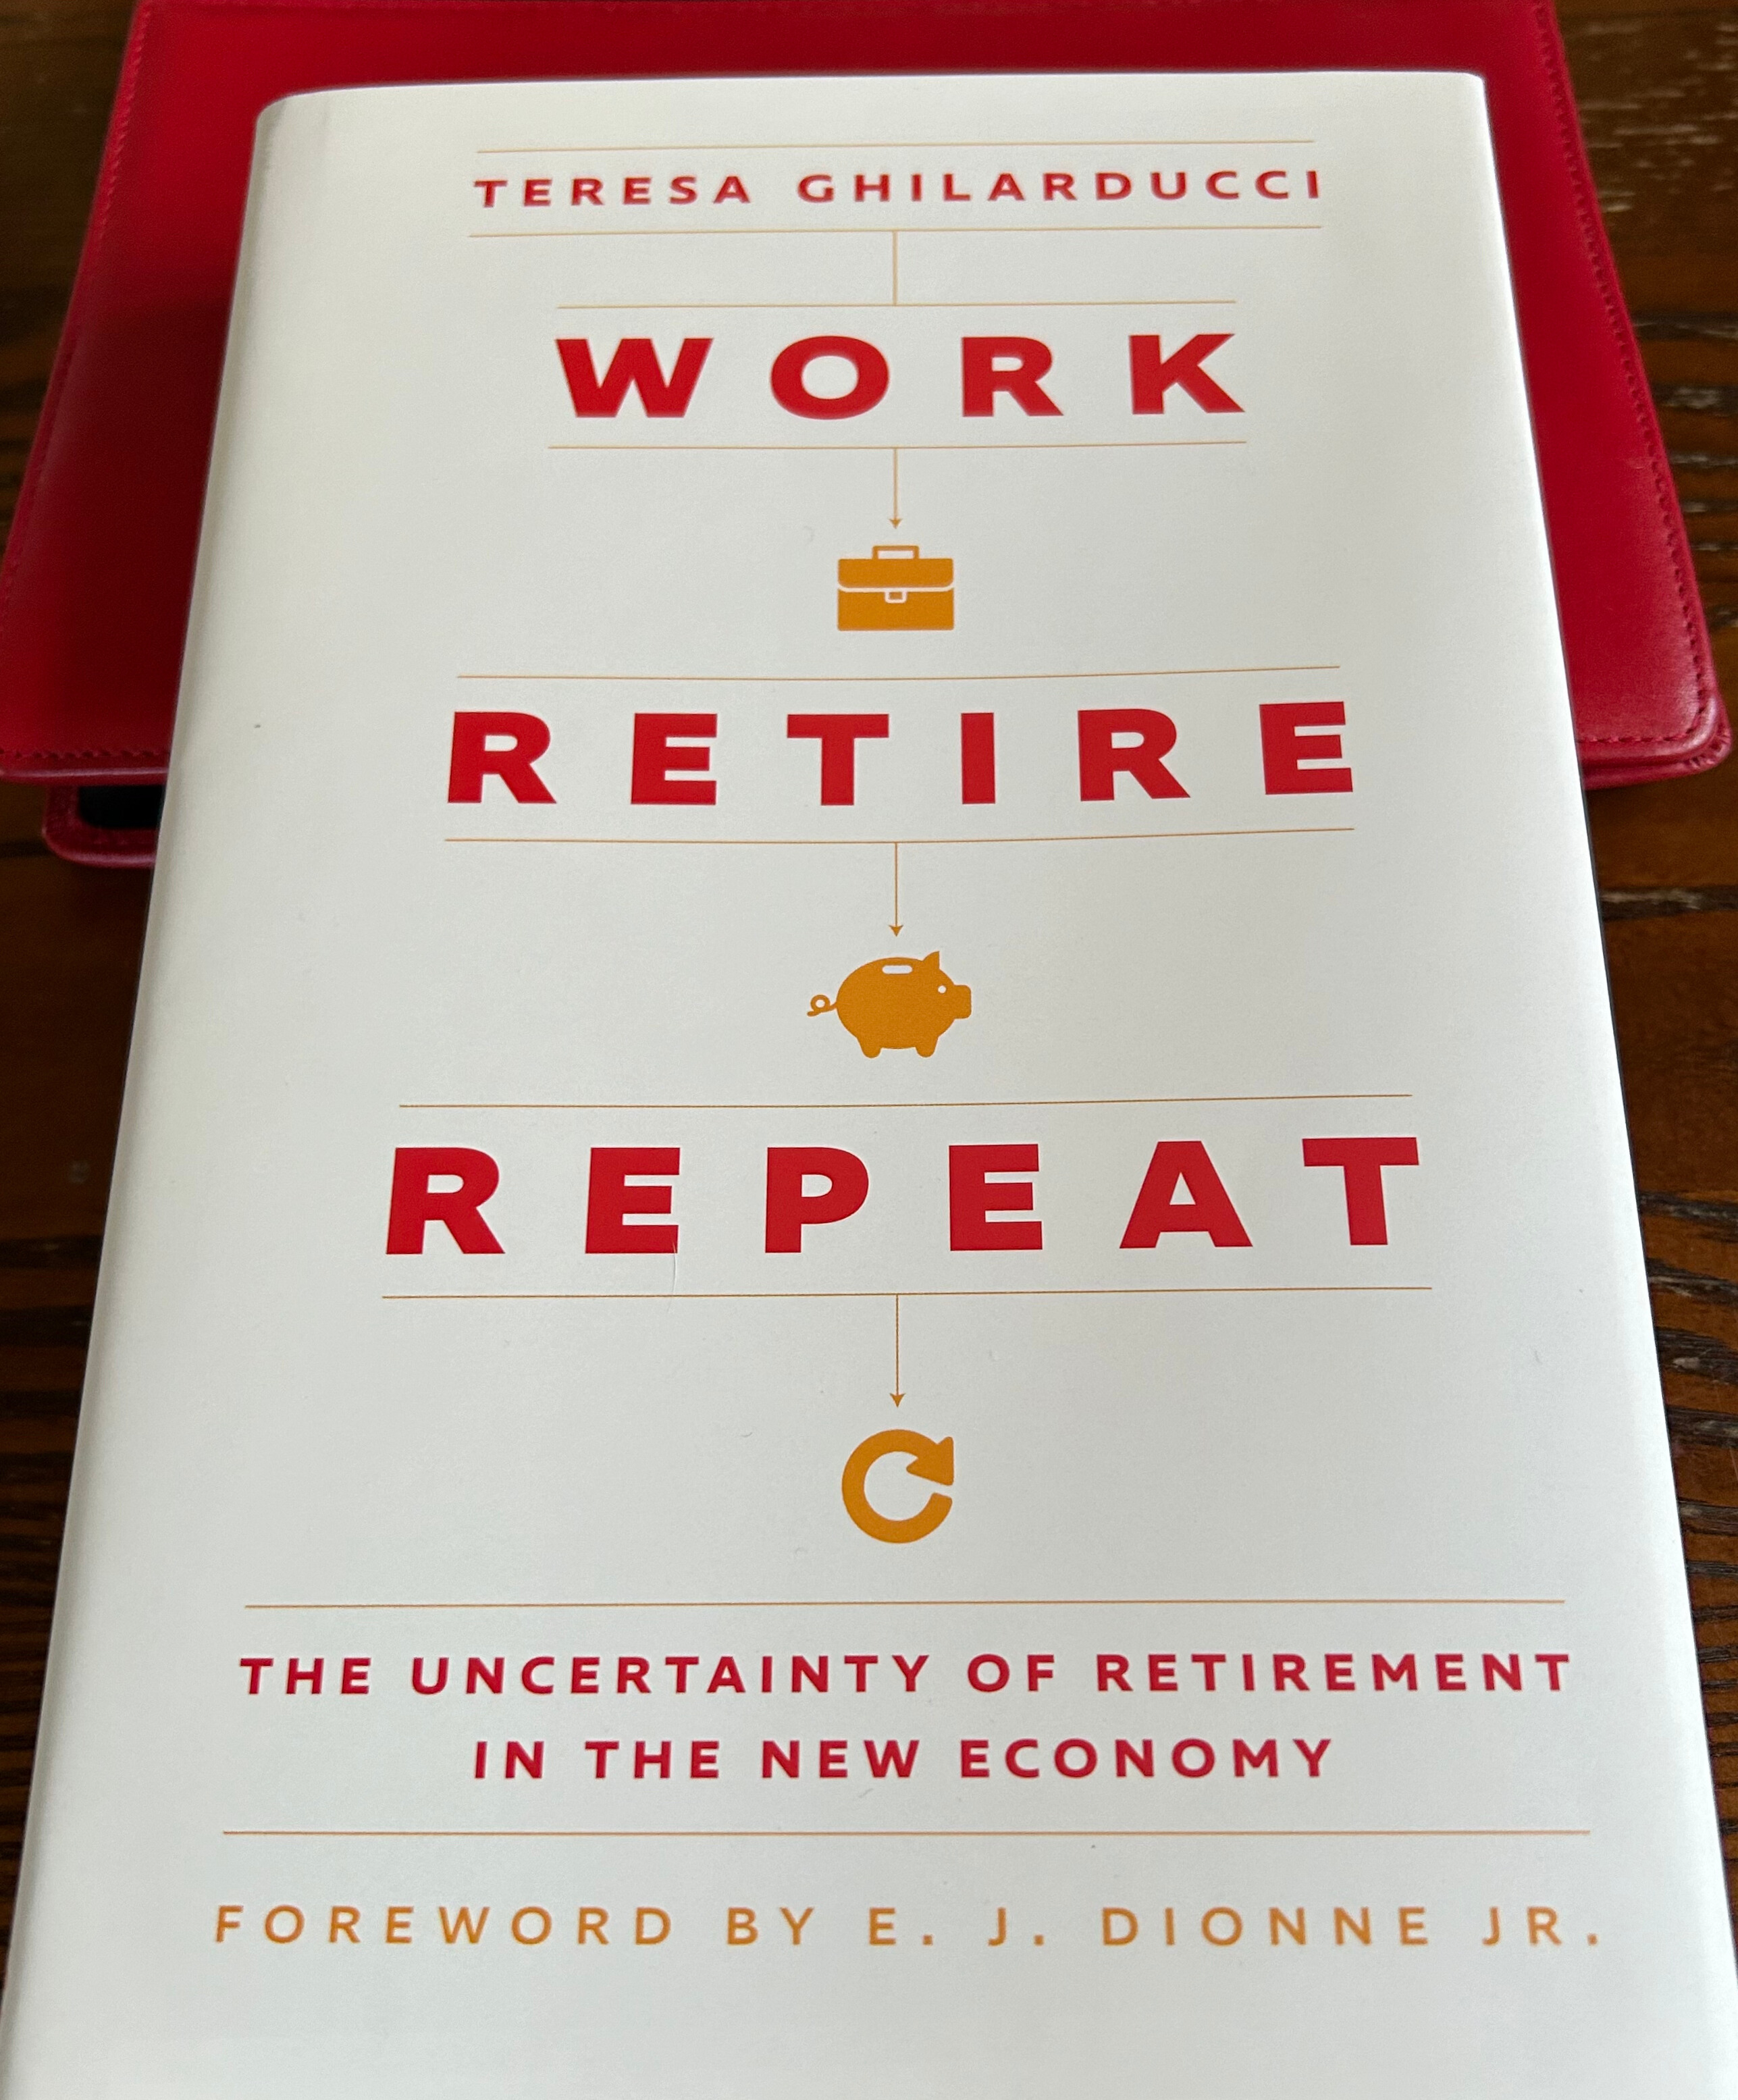 “Work, Retire, Repeat: The Uncertainty of Retirement in the New Economy” by Teresa Ghilarducci